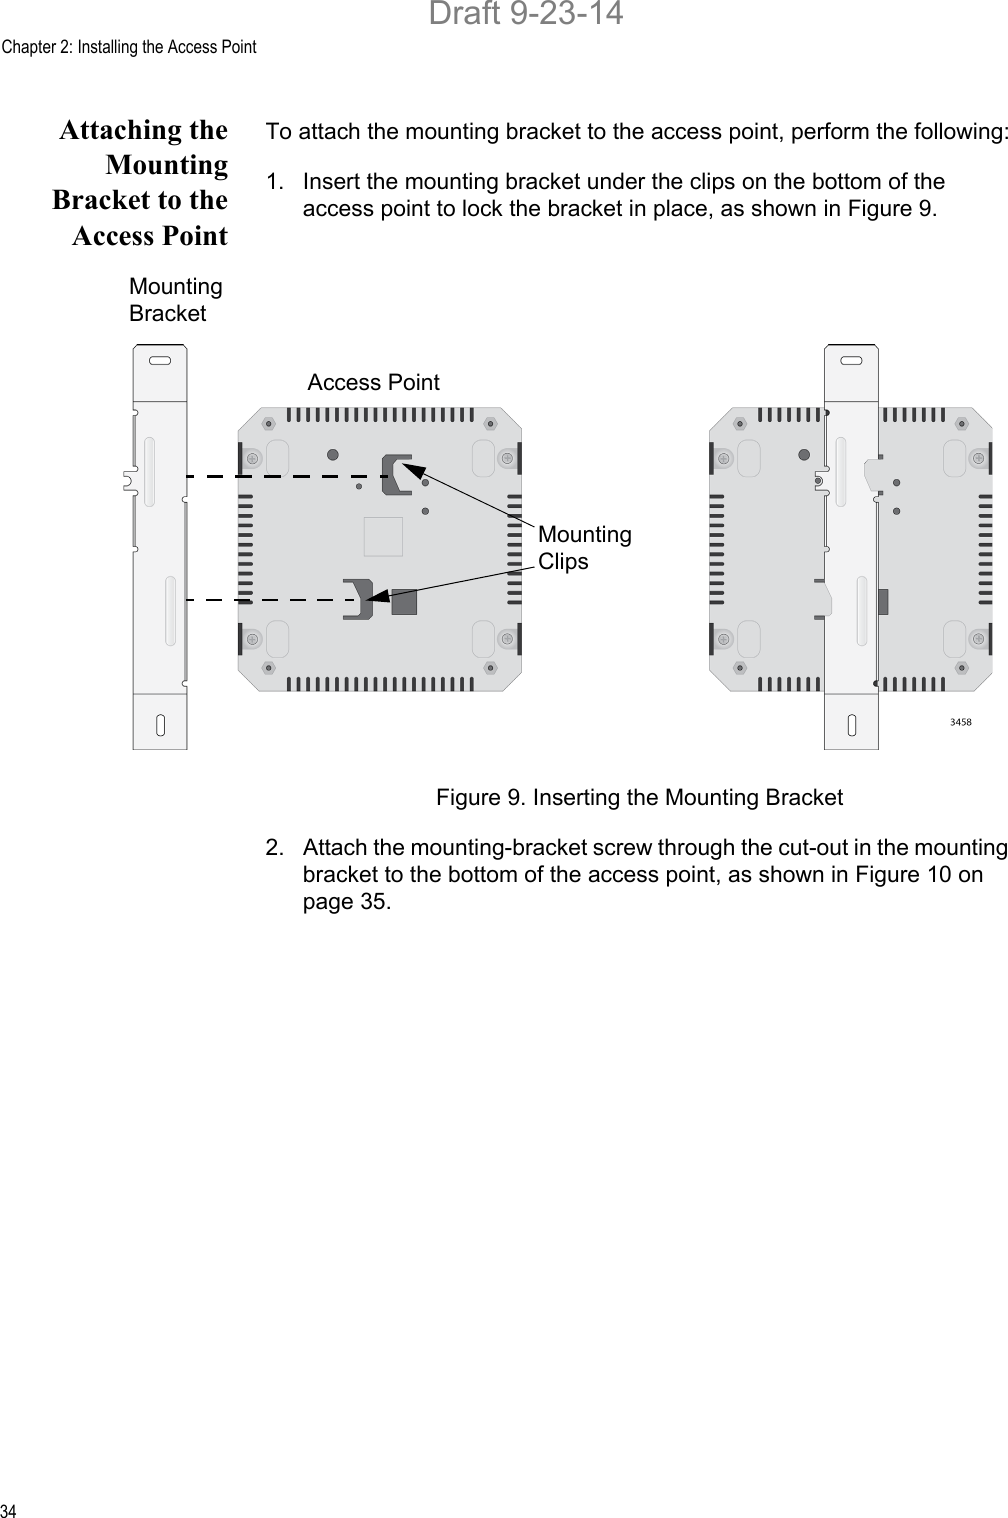 Chapter 2: Installing the Access Point34Attaching theMountingBracket to theAccess PointTo attach the mounting bracket to the access point, perform the following:1. Insert the mounting bracket under the clips on the bottom of the access point to lock the bracket in place, as shown in Figure 9.Figure 9. Inserting the Mounting Bracket2. Attach the mounting-bracket screw through the cut-out in the mounting bracket to the bottom of the access point, as shown in Figure 10 on page 35.MountingBracketAccess PointMountingClipsDraft 9-23-14